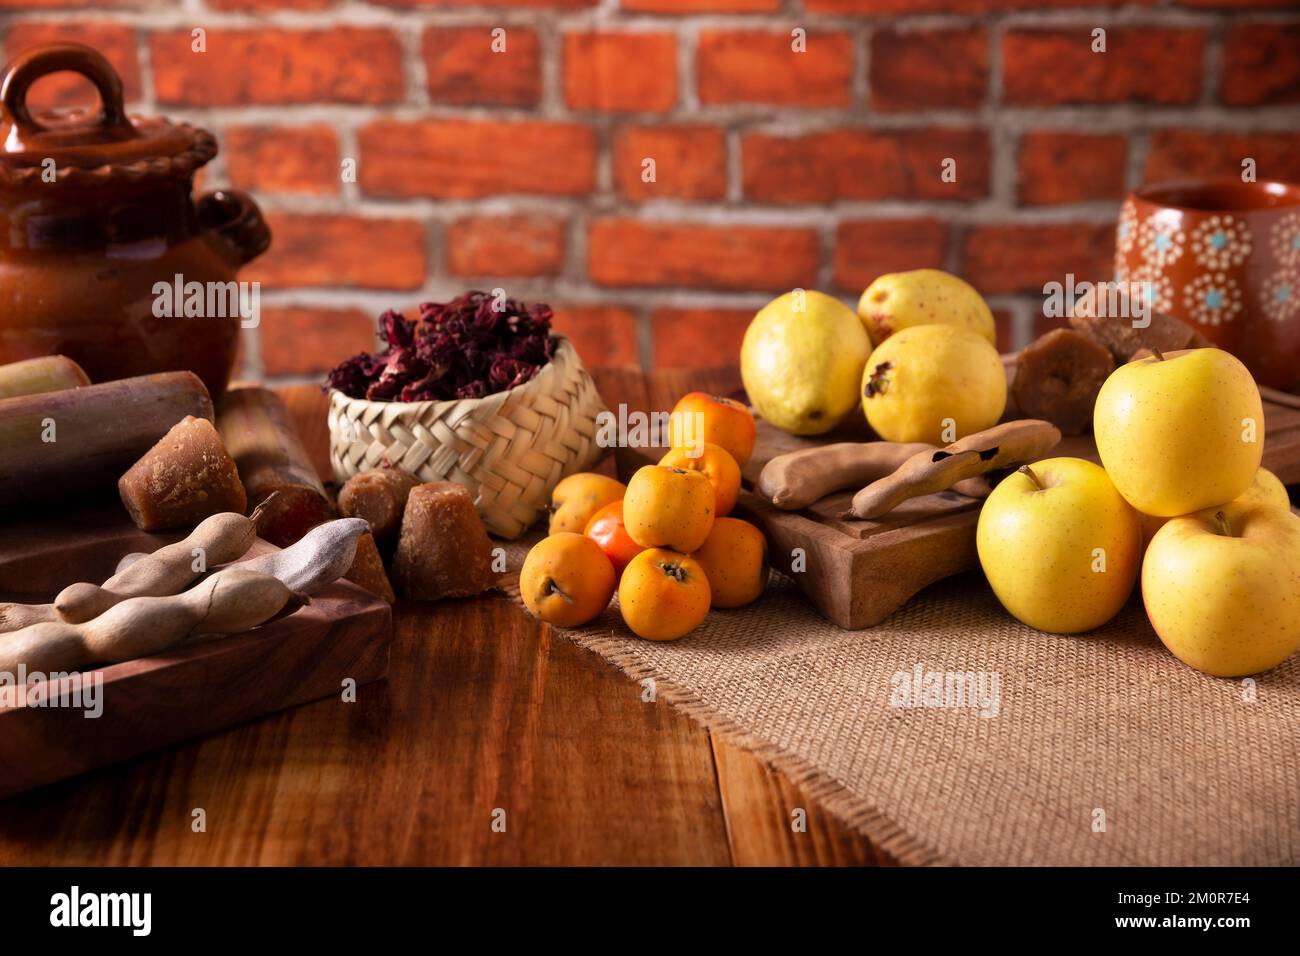 Basic ingredients to prepare Mexican fruit punch, a hot drink traditionally consumed during the December season at posadas and Christmas celebrations. Stock Photo